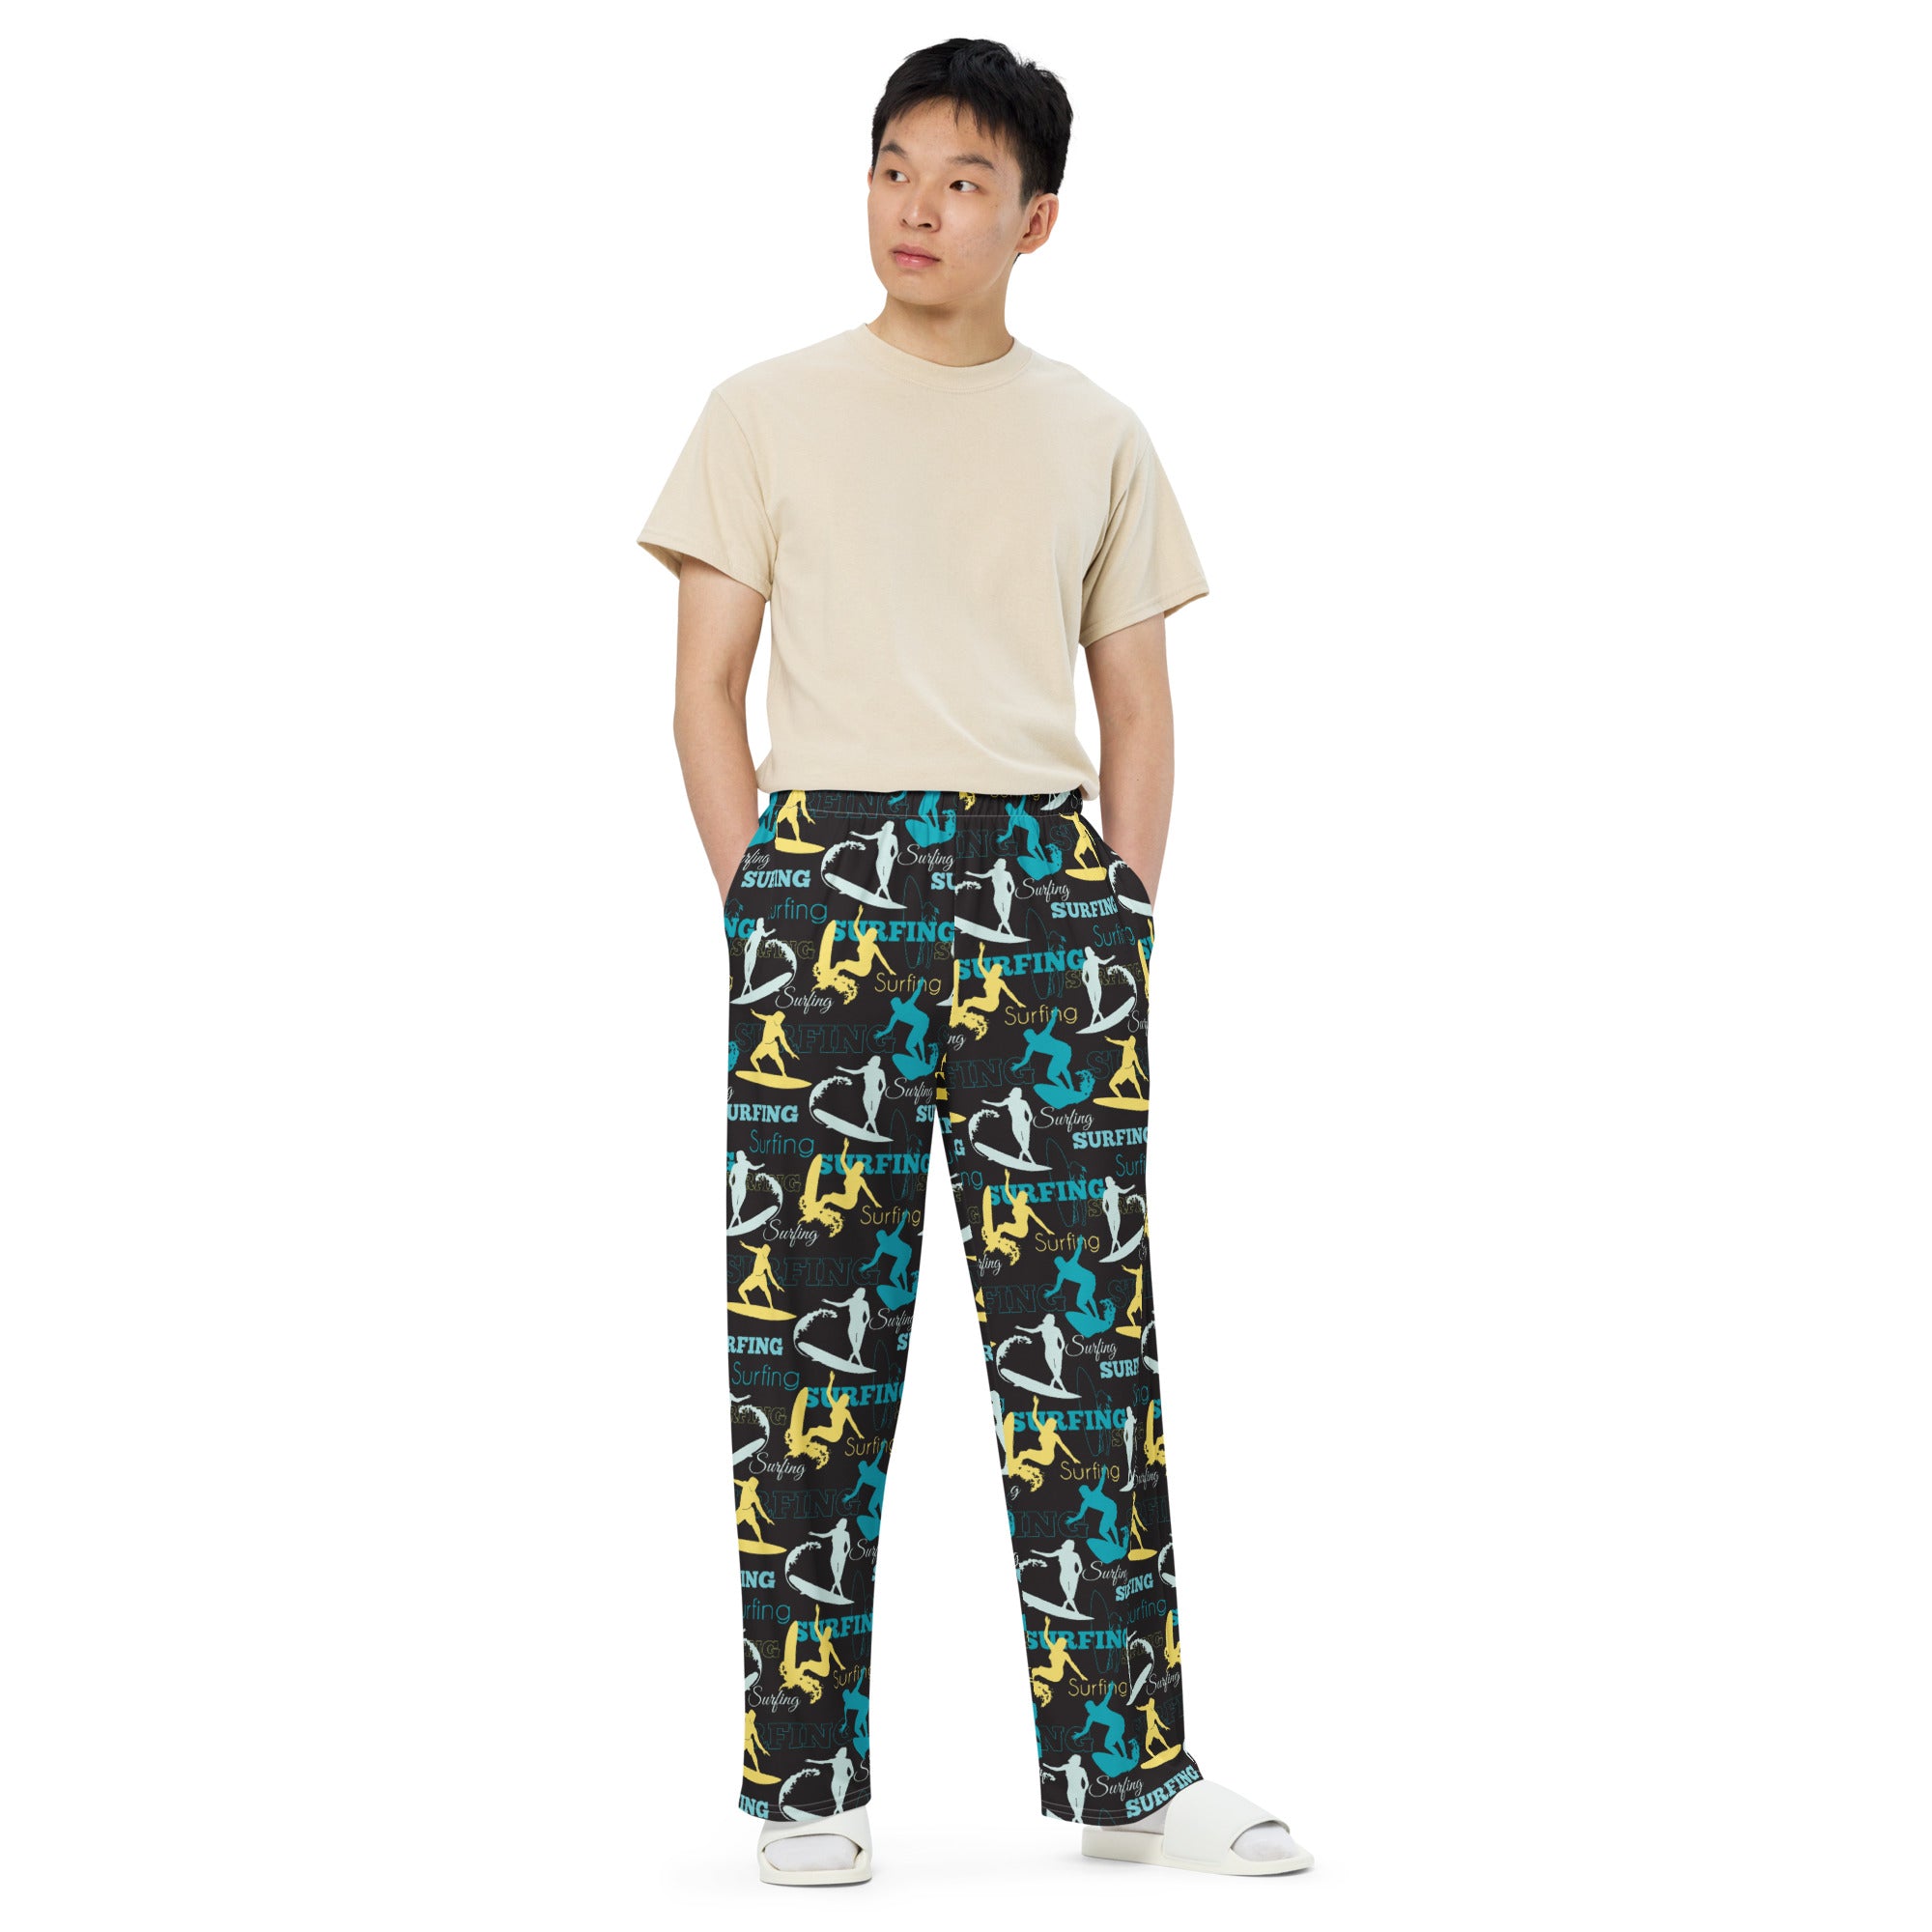 Loose-Fit Lounge Pants - Gone Surfing